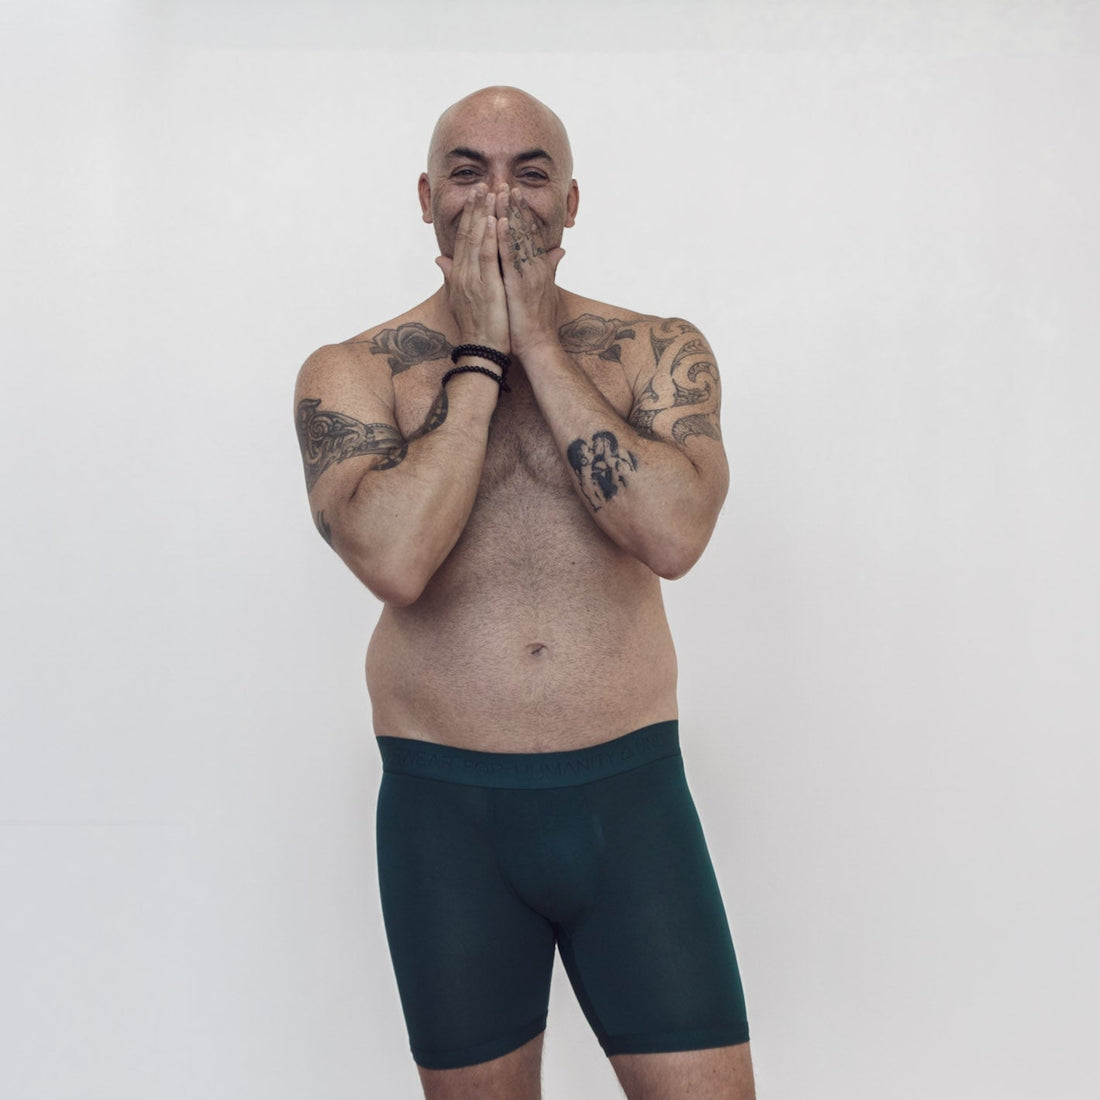 Sustainable, ethically made atlantis trunk style underwear. Long leg, wide thigh fit with elastic bind, no riding, cup support close to the body. made with tencel fabric and recycled elastic, thin, no dig waist band. Model wears shorts